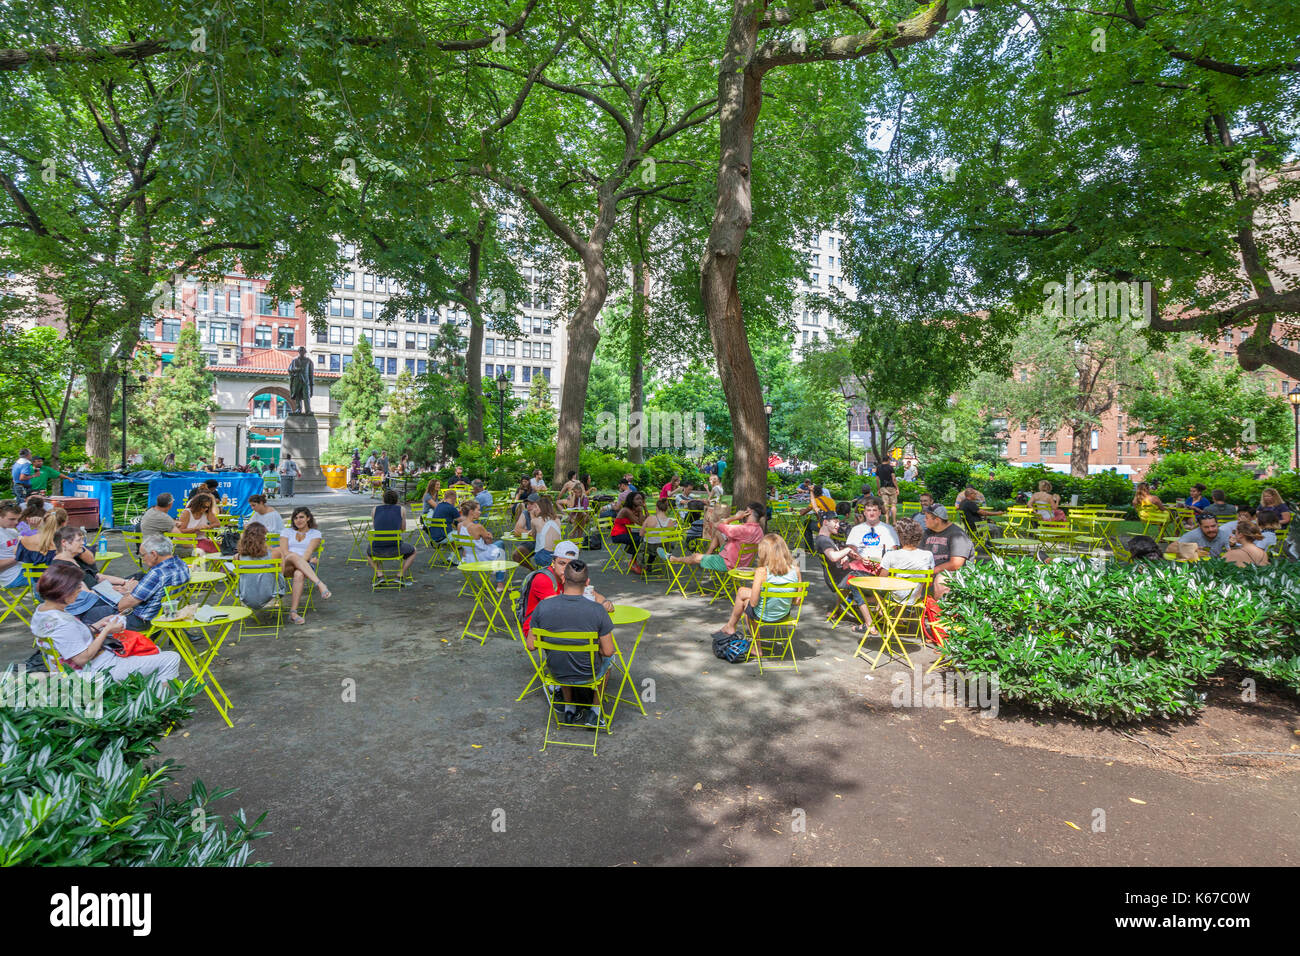 People enjoying leisure time in Union Square, New York near the Abraham Lincoln Monument. Stock Photo